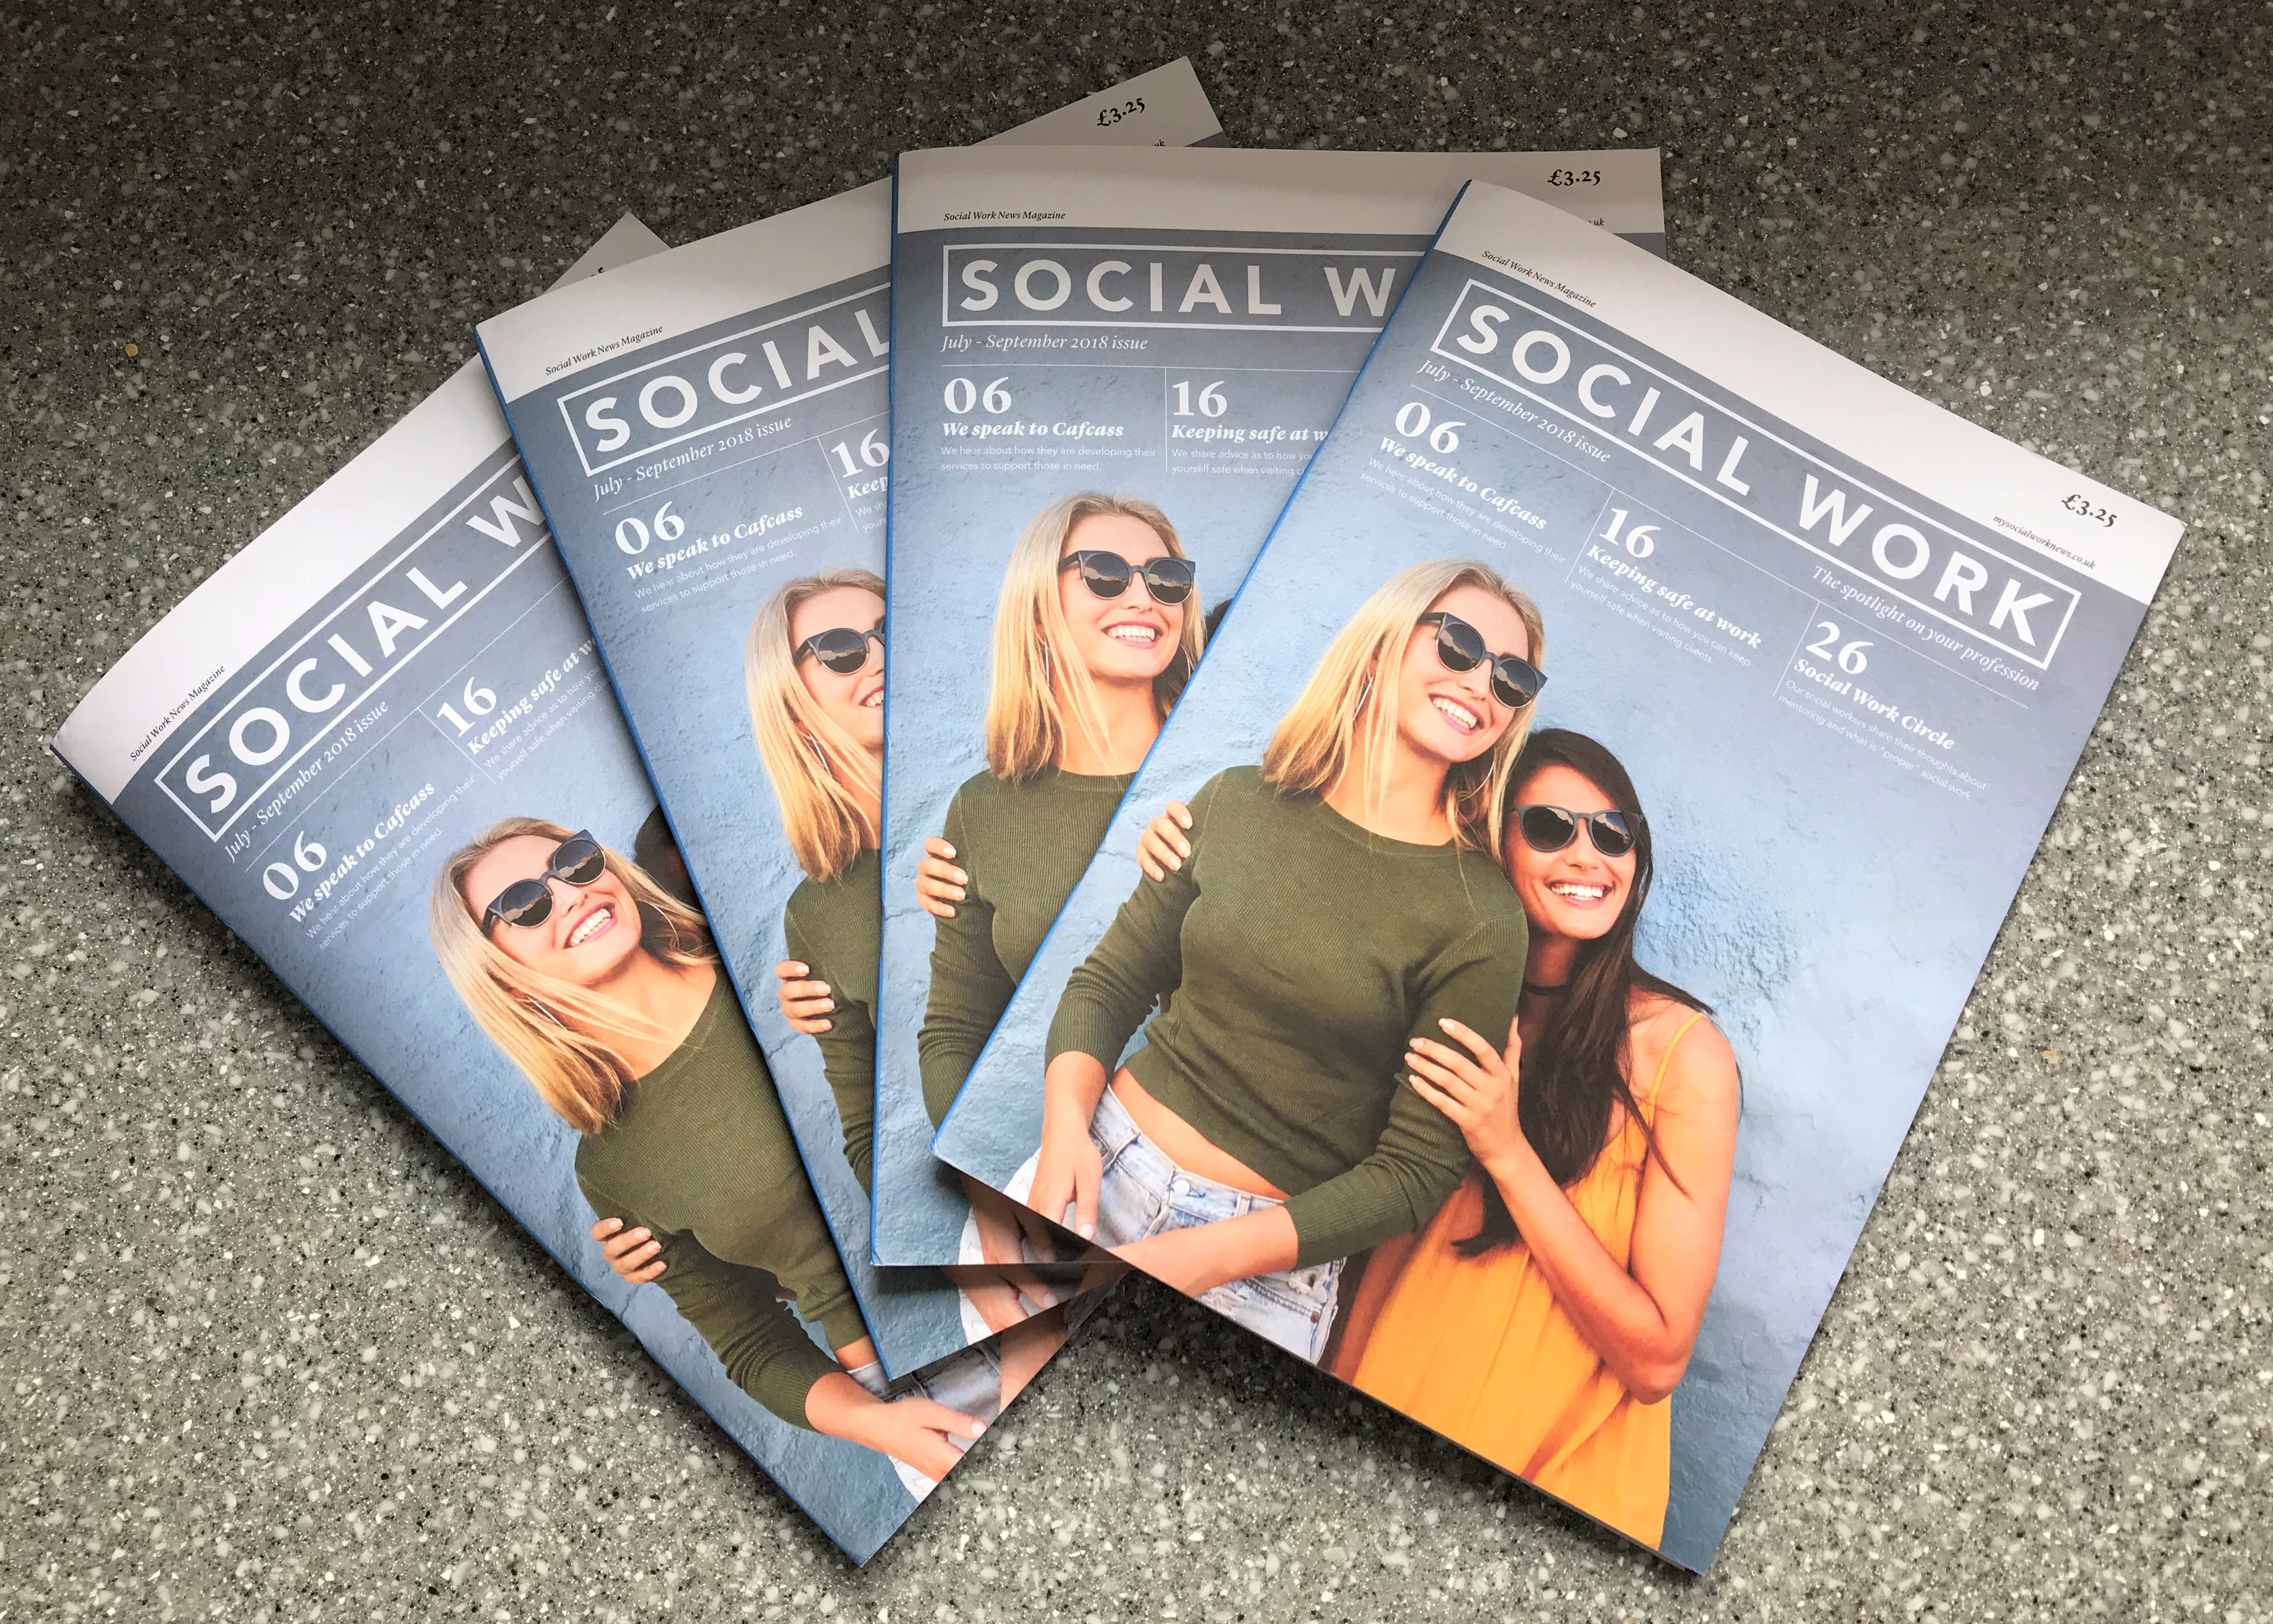 Social Work News is written and edited by Gatekeeper Communications